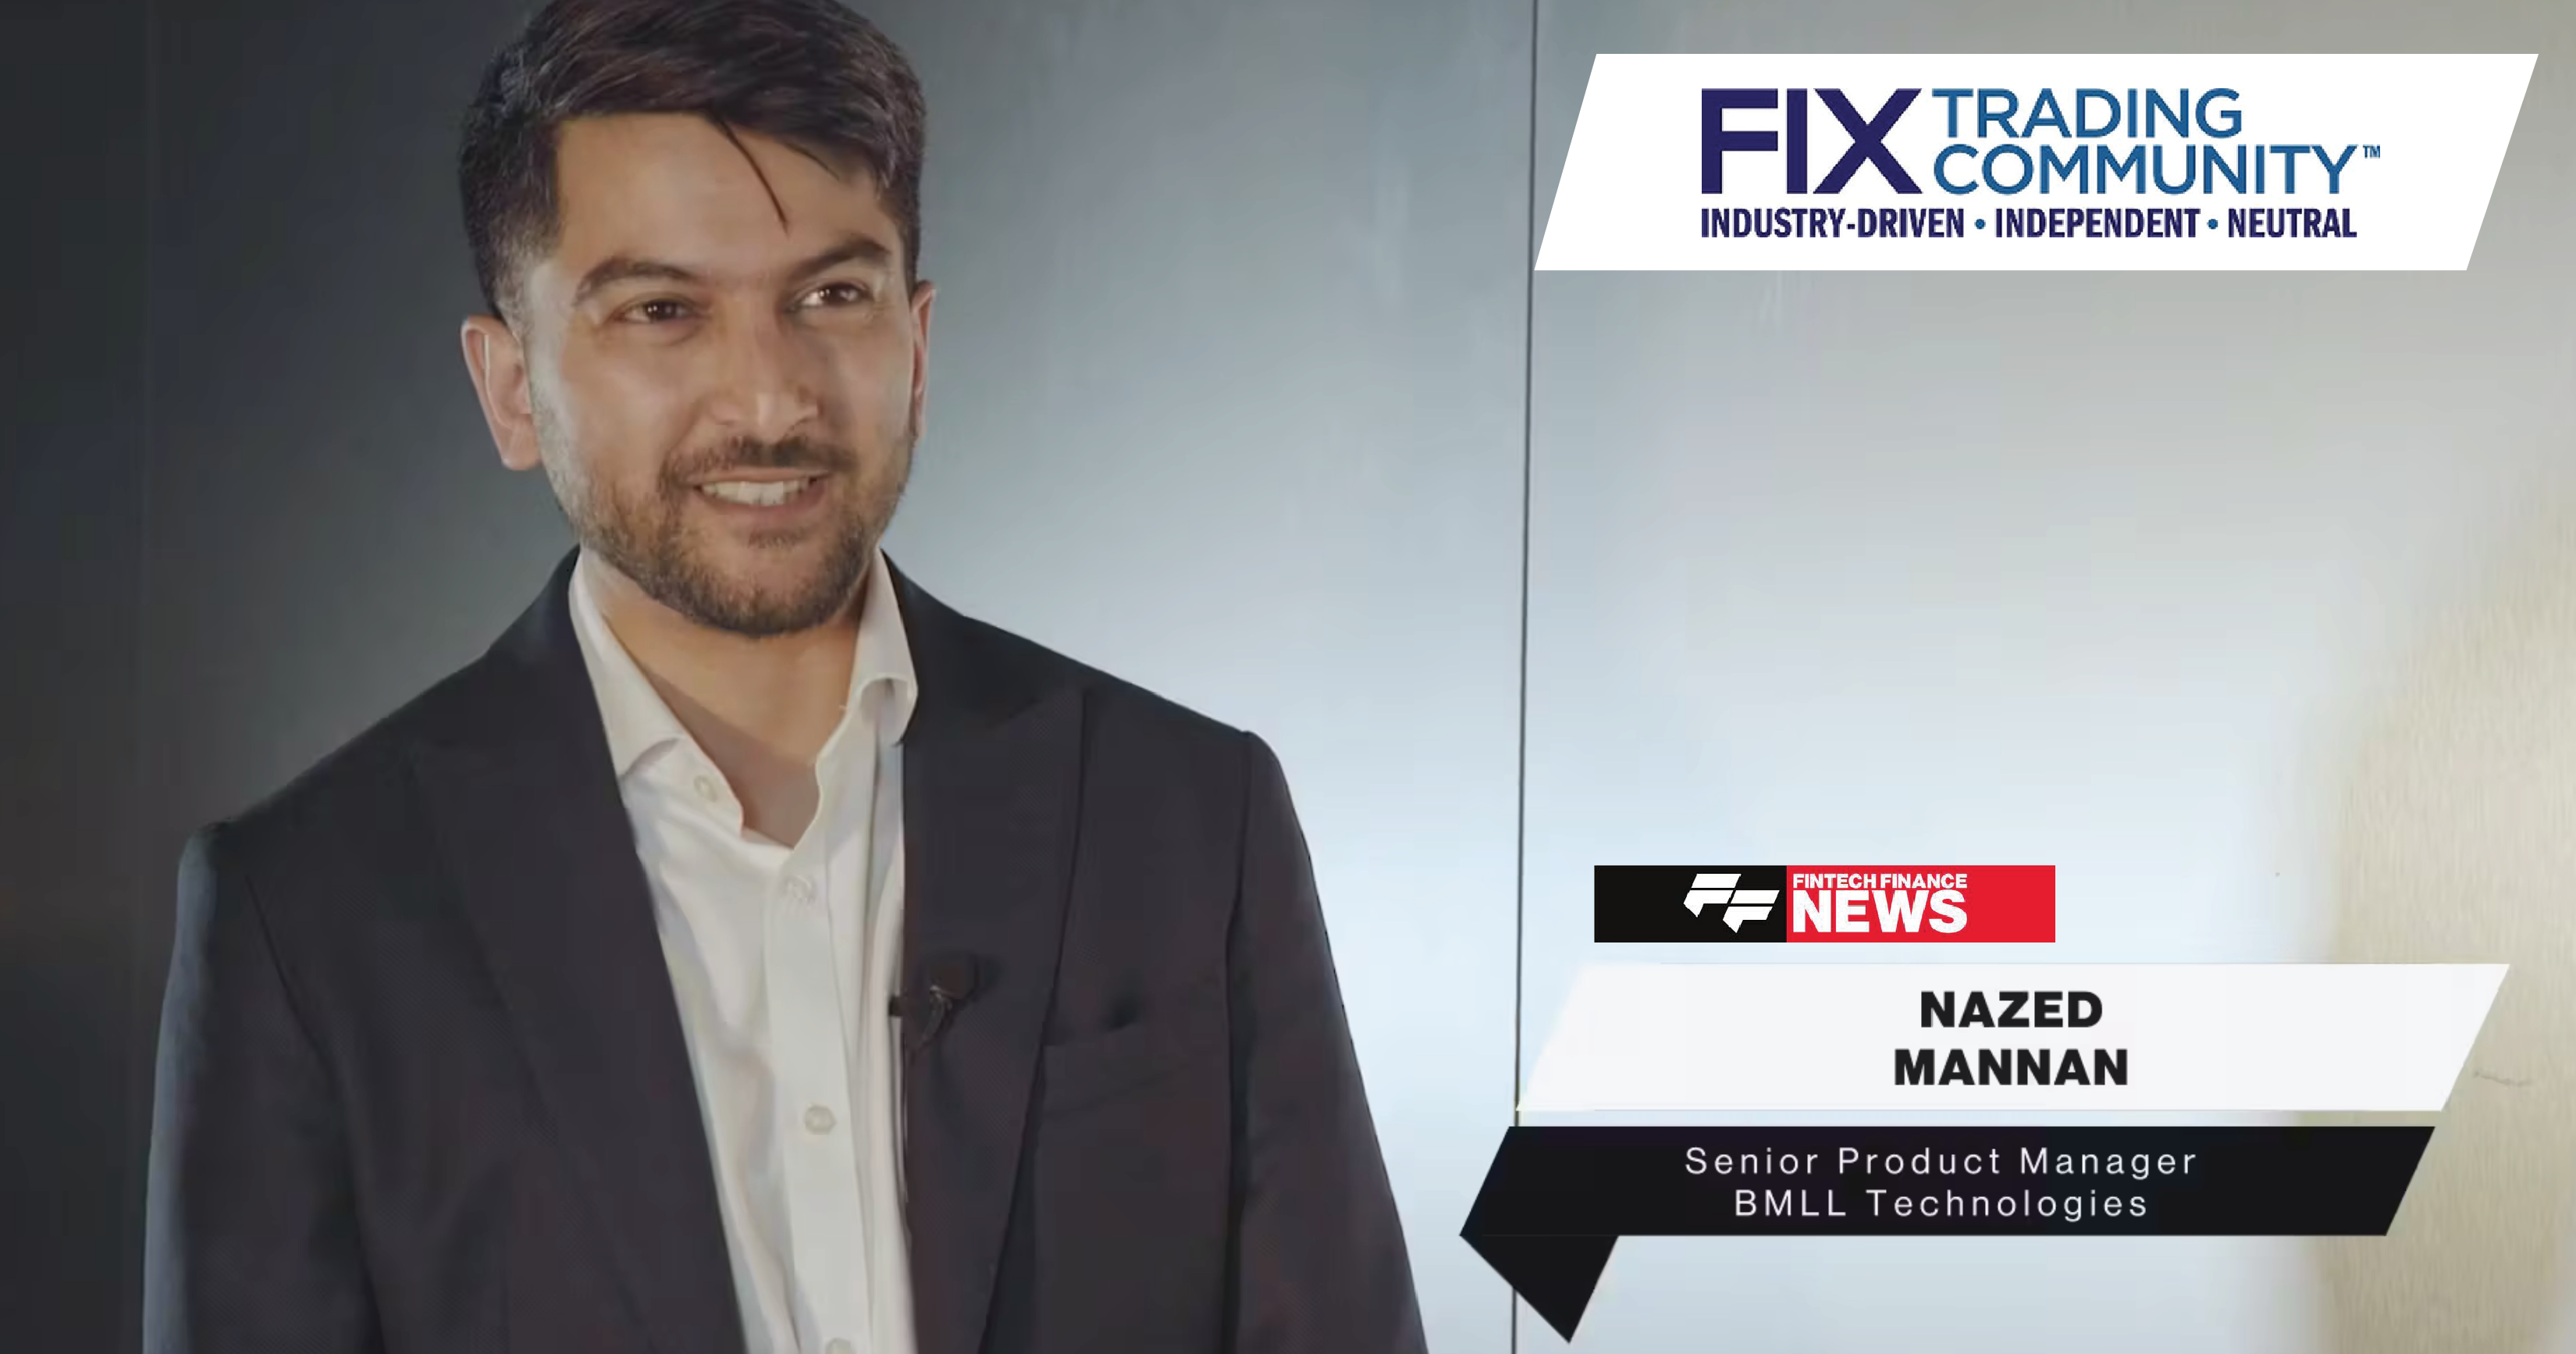 Photo for Nazed Mannan speaks with Fintech Finance News at FIX Nordic Trading Conference news story